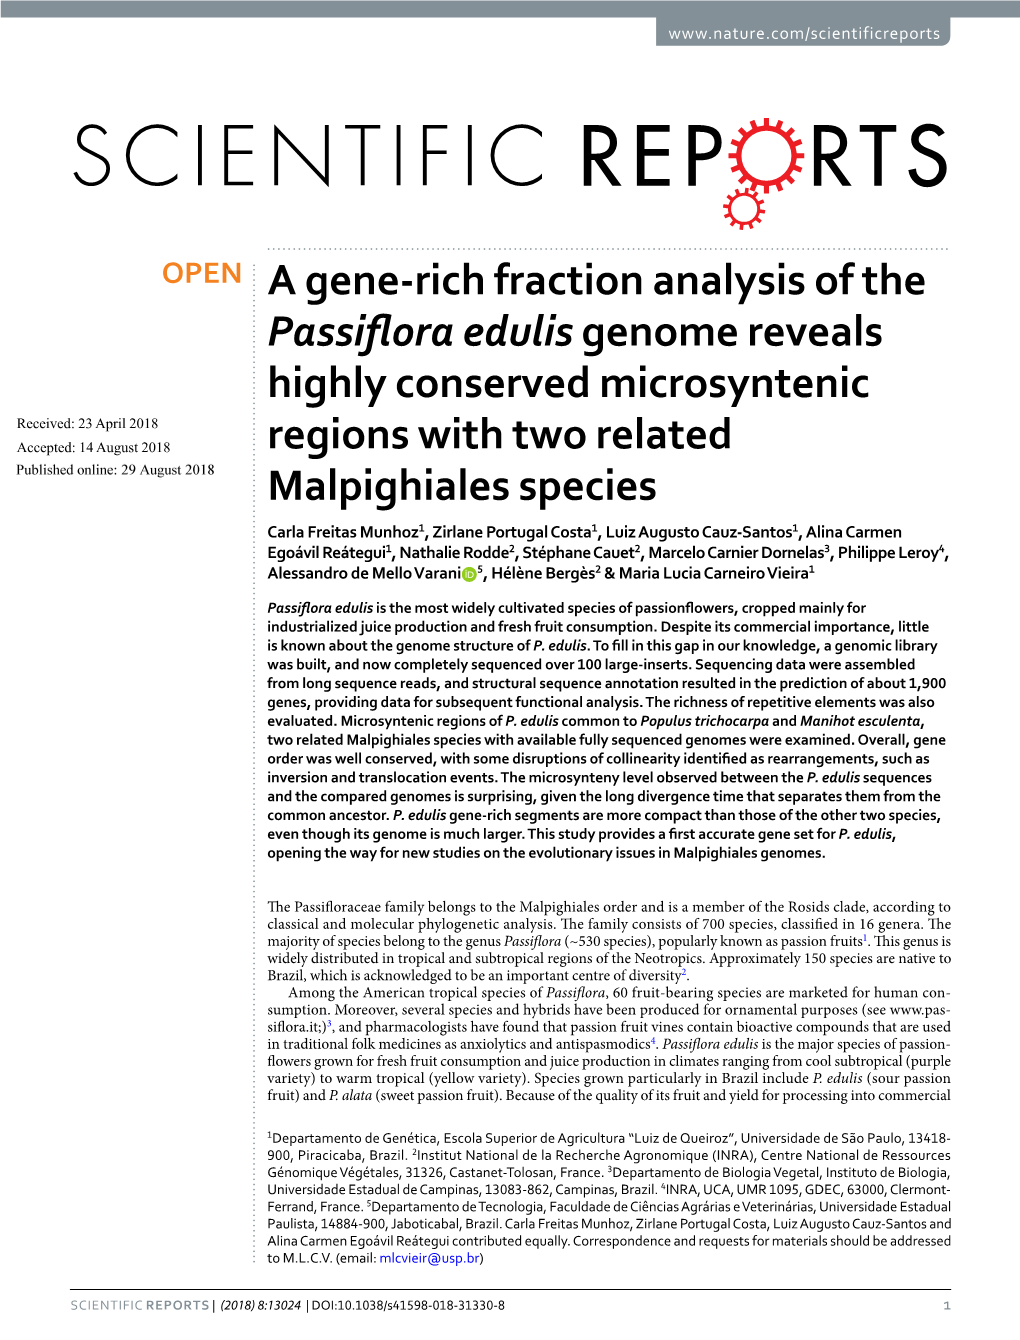 A Gene-Rich Fraction Analysis of the Passiflora Edulis Genome Reveals